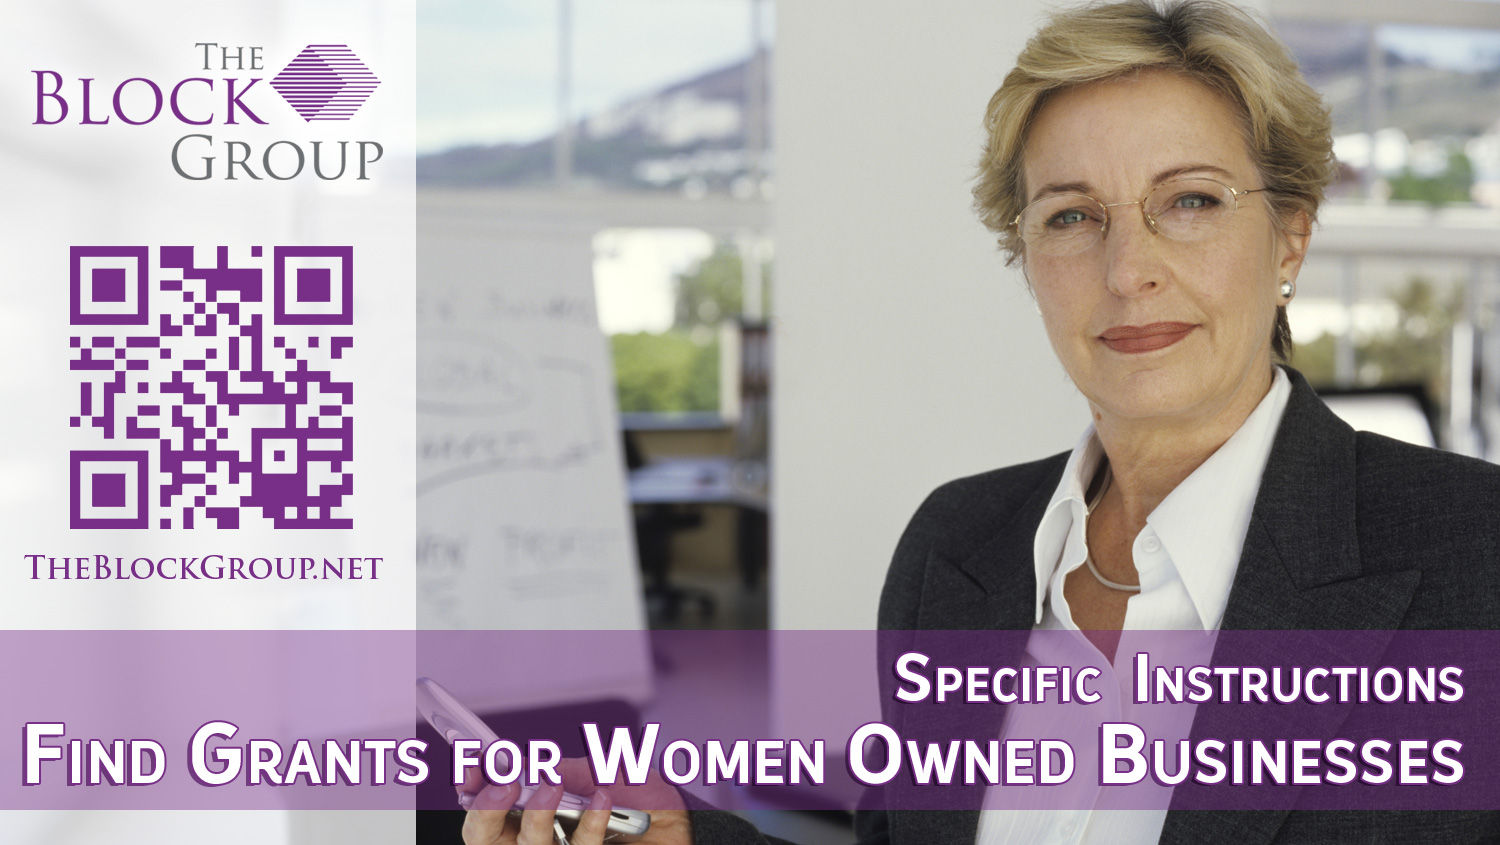 How to Find Grants for Women Owned Businesses The Block Group